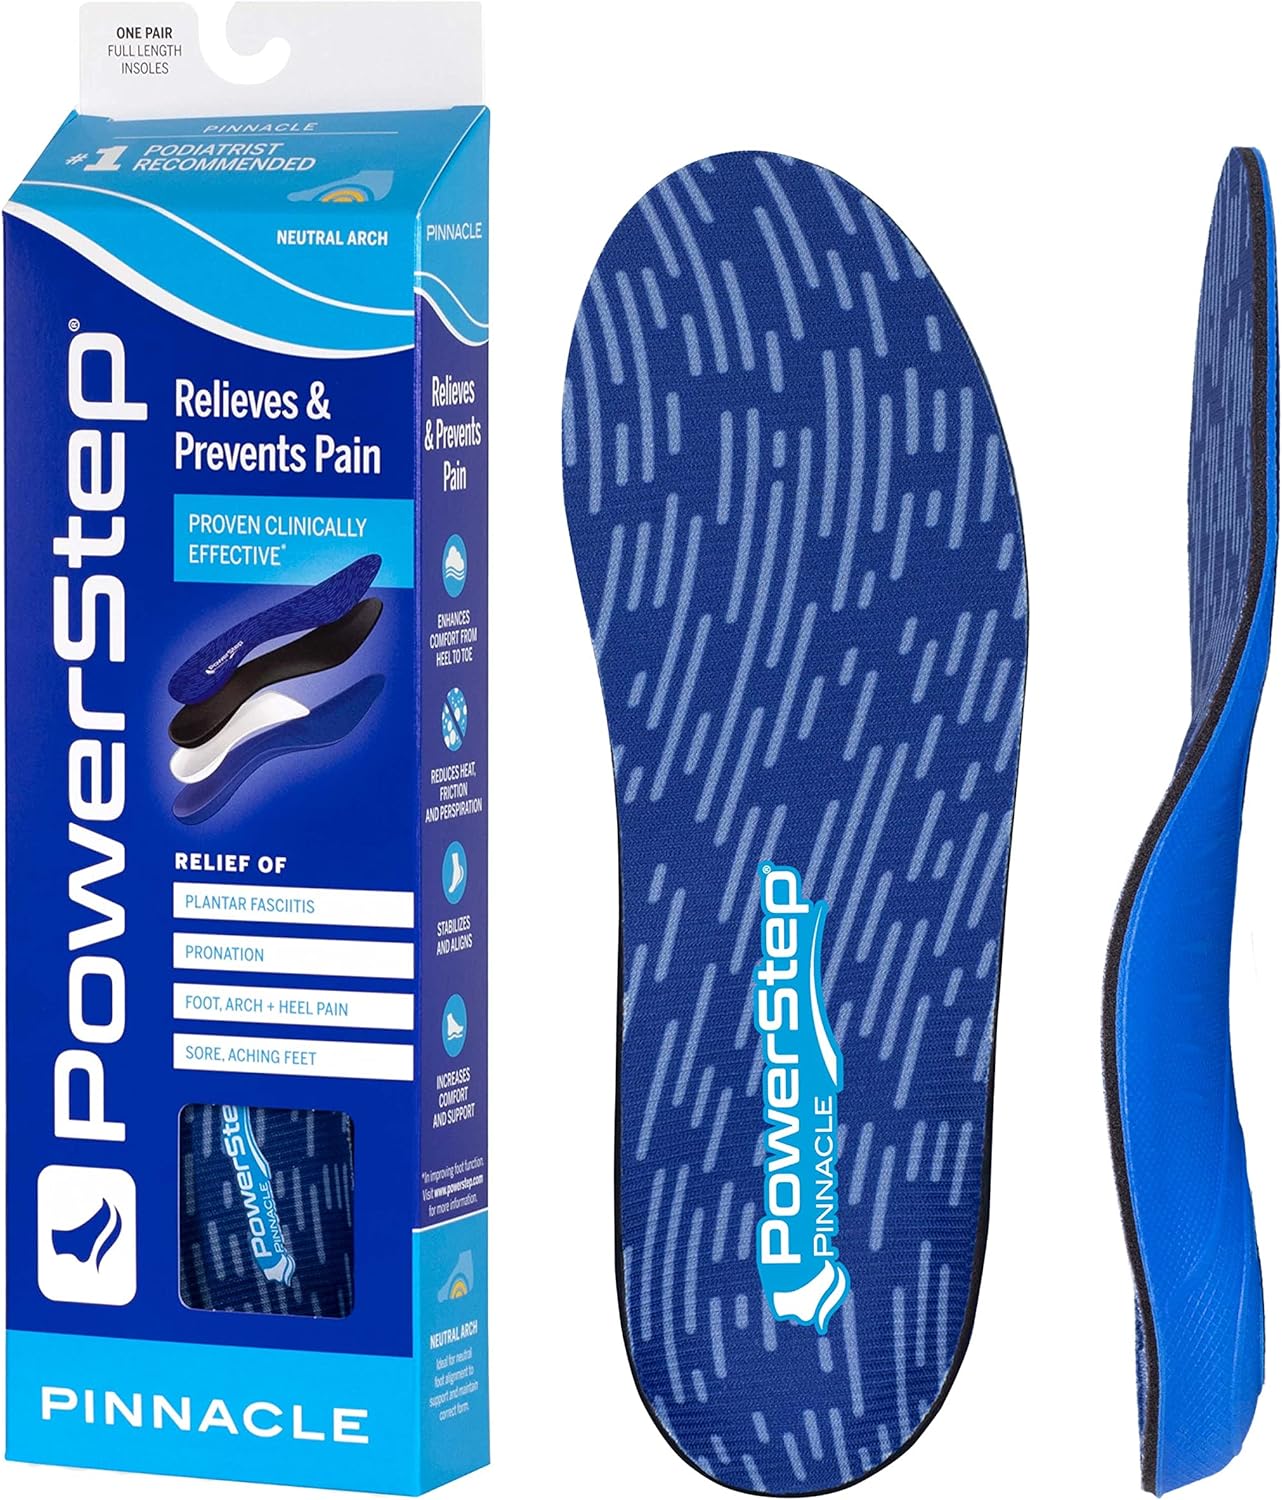 Powerstep Pinnacle Insoles - Orthotics for Plantar Fasciitis  Heel Pain Relief - Full Length Orthotic Insoles for Arch Pain with Moderate Pronation - #1 Podiatrist Recommended (M 12-13)